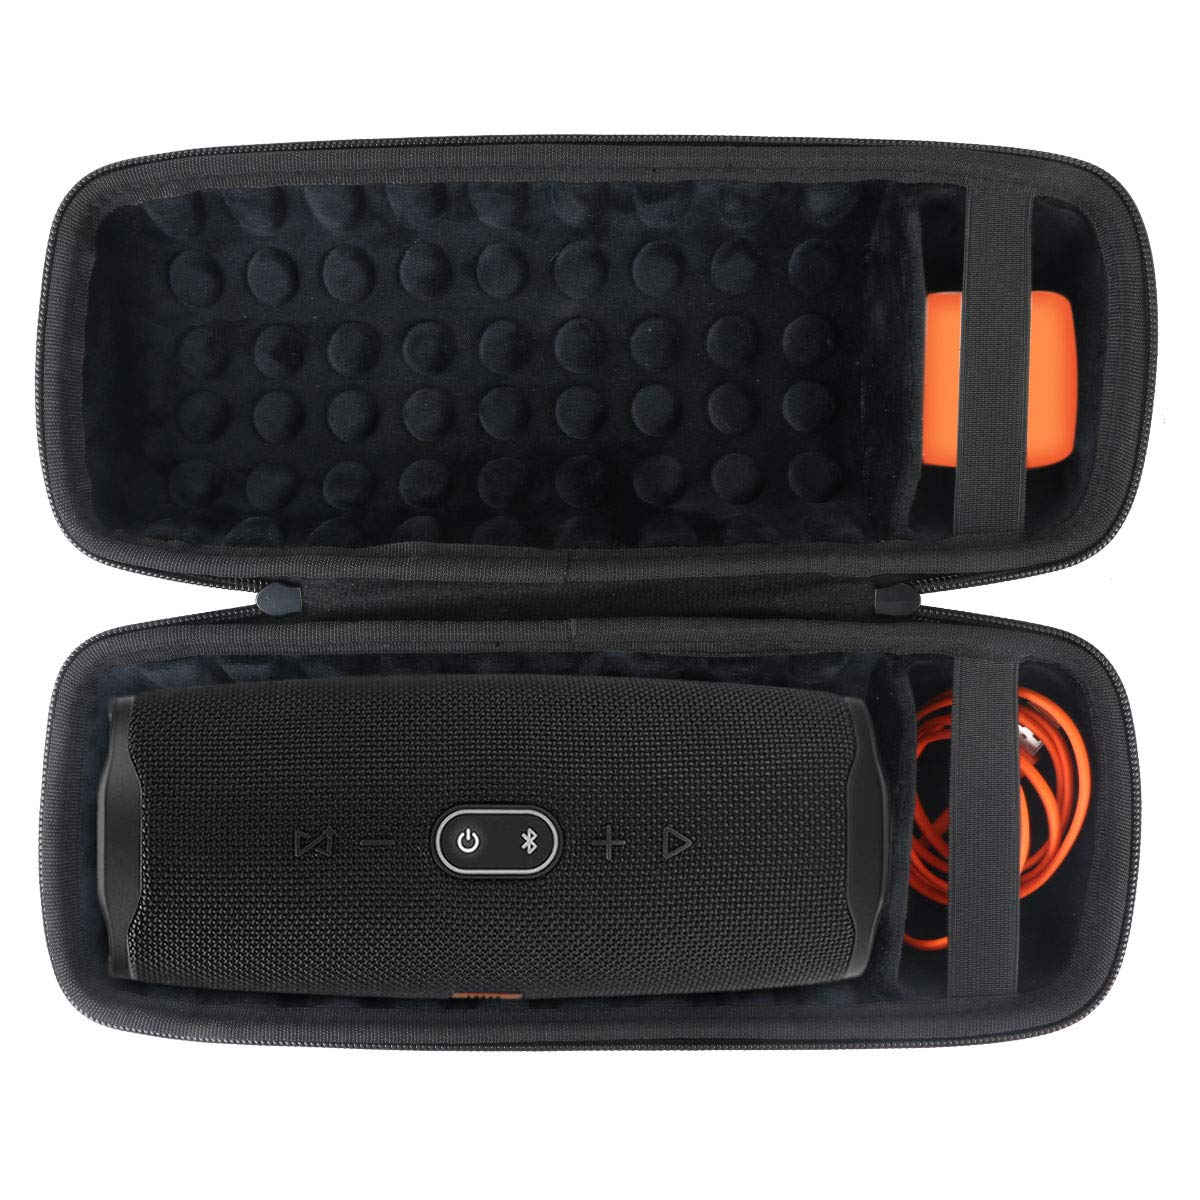 Khanka Hard Travel Case + Silicone Case Replacement for JBL Charge 4 Portable Waterproof Wireless Bluetooth Speaker